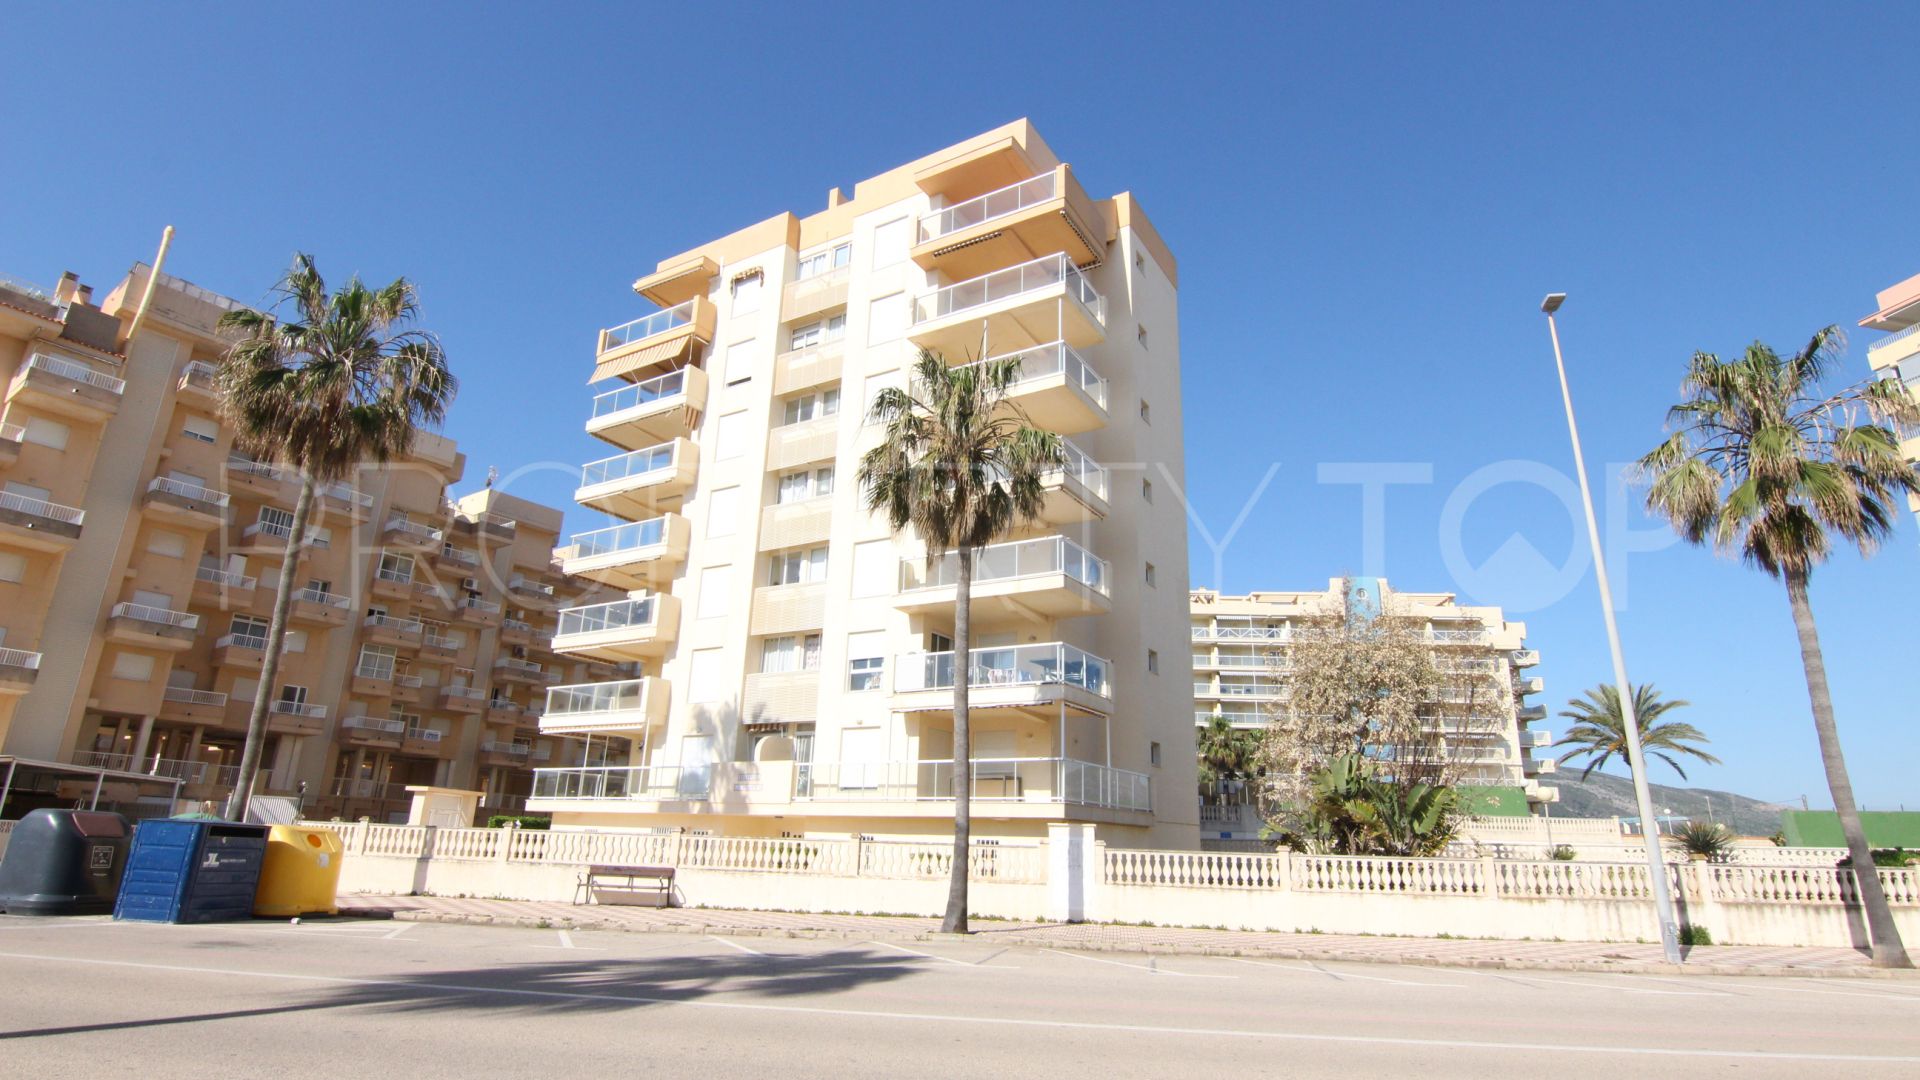 3 bedrooms apartment for sale in Xeraco